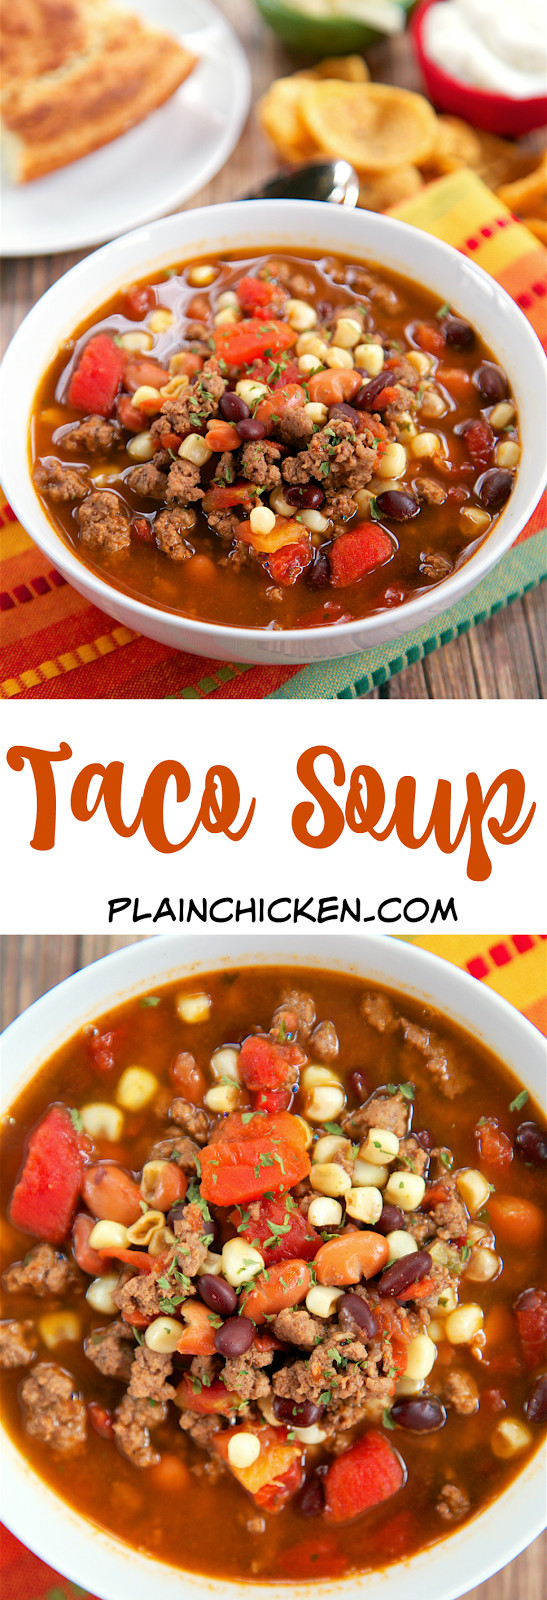 Pinto Beans And Ground Beef Recipe Slow Cooker
 Taco Soup